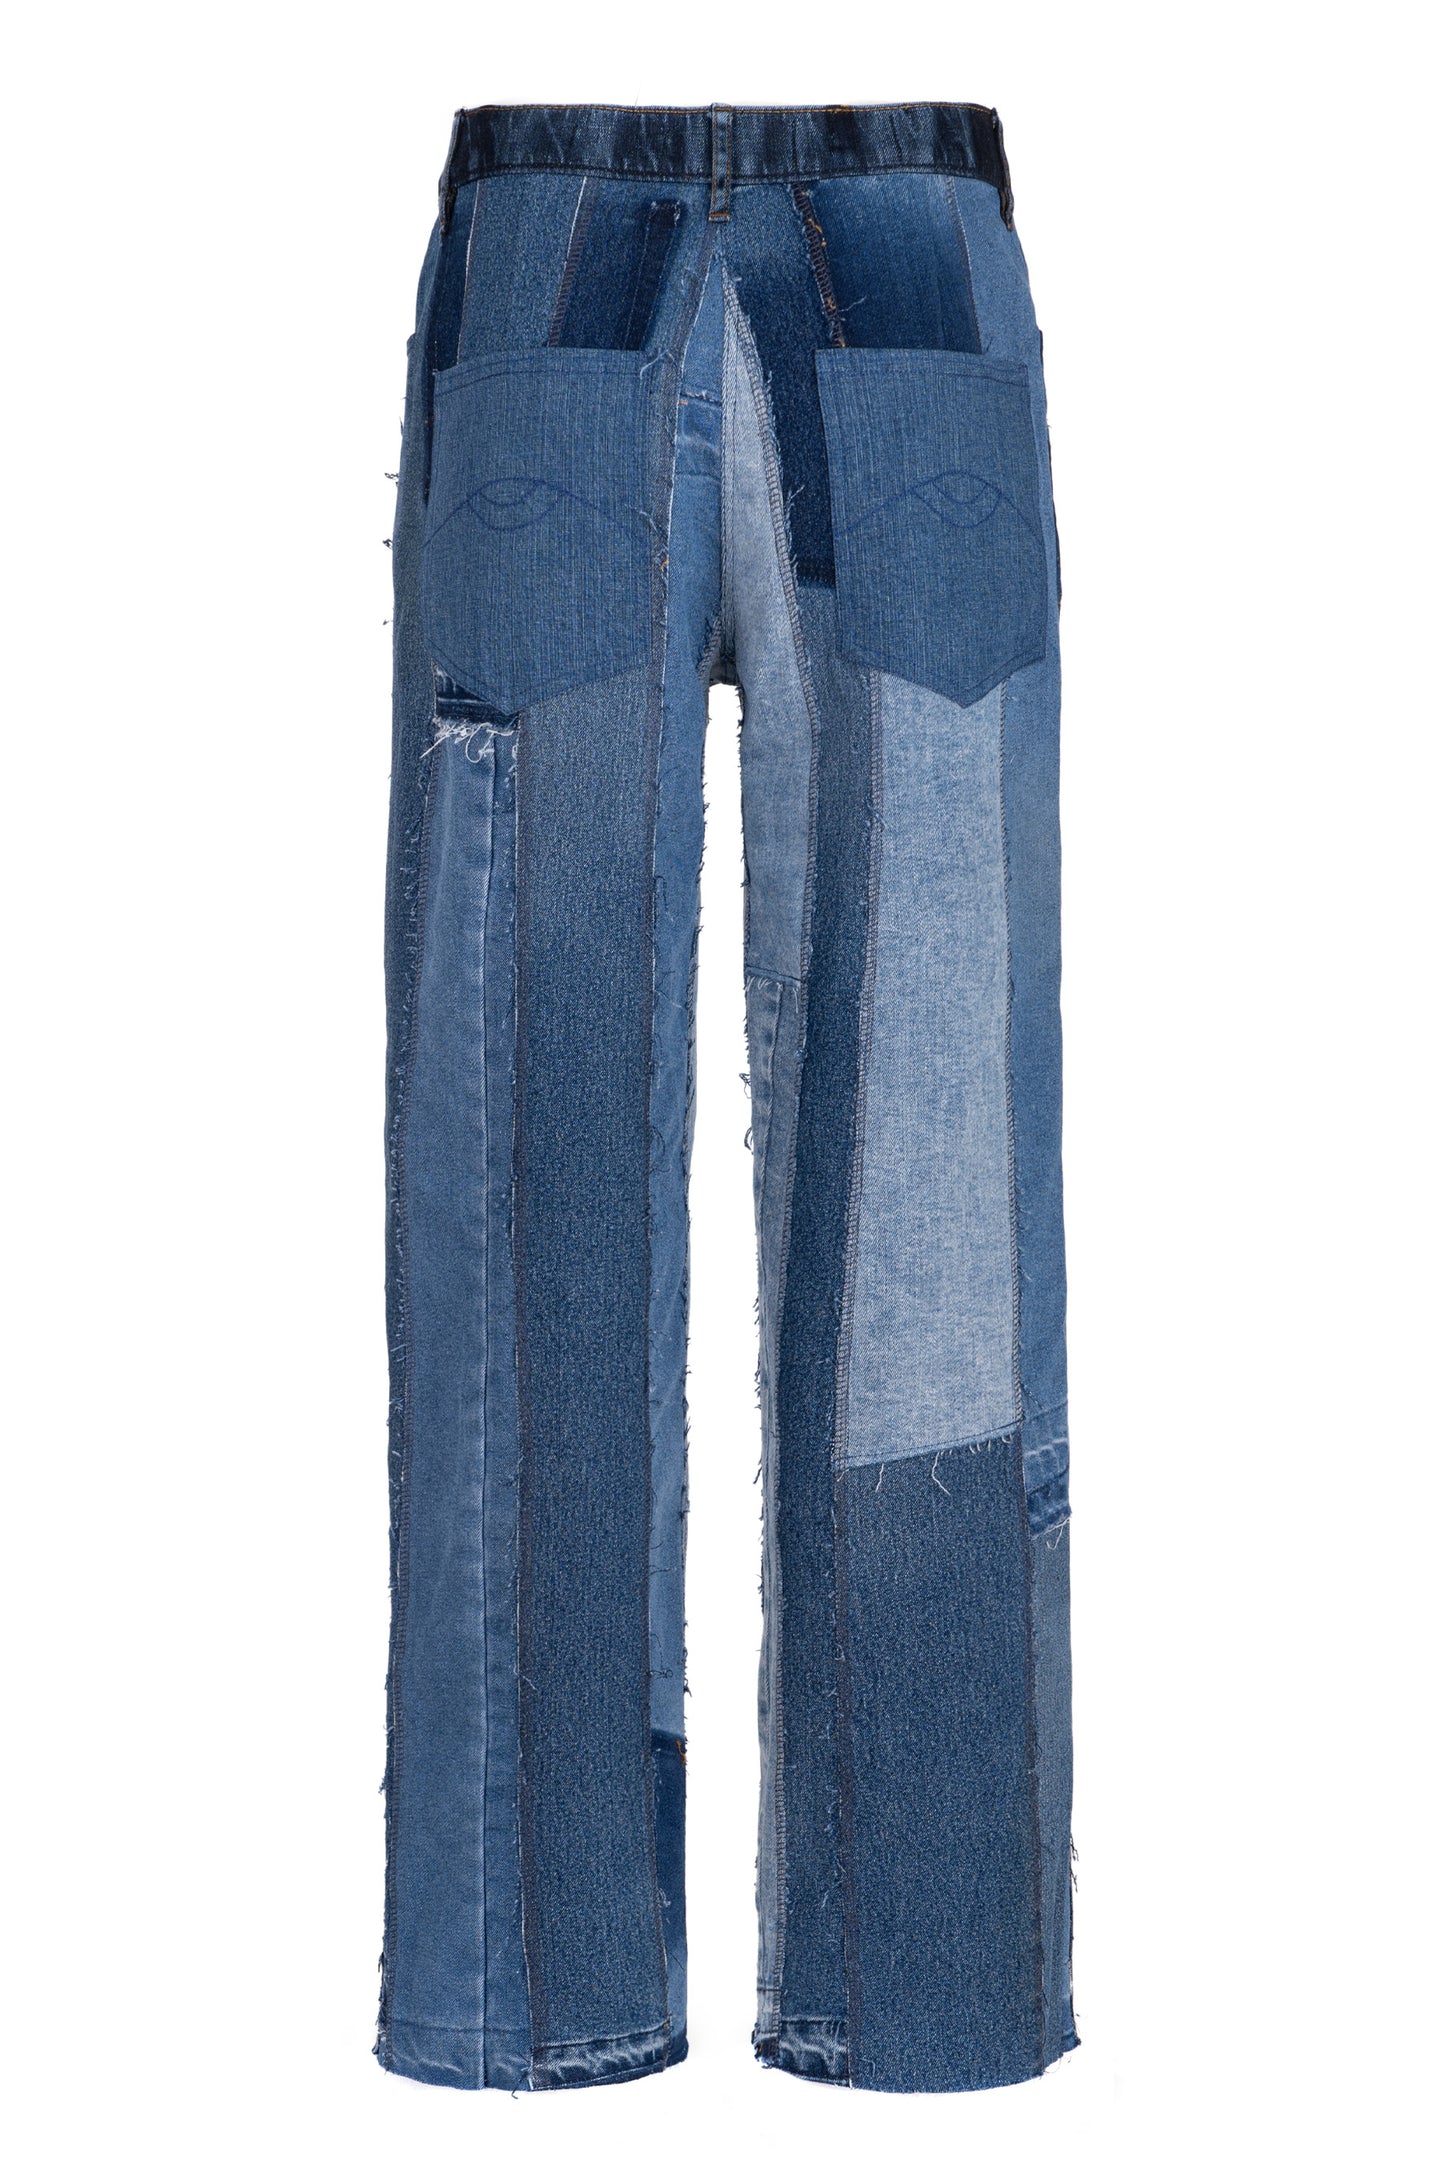 Straight Leg Upcycled Jeans